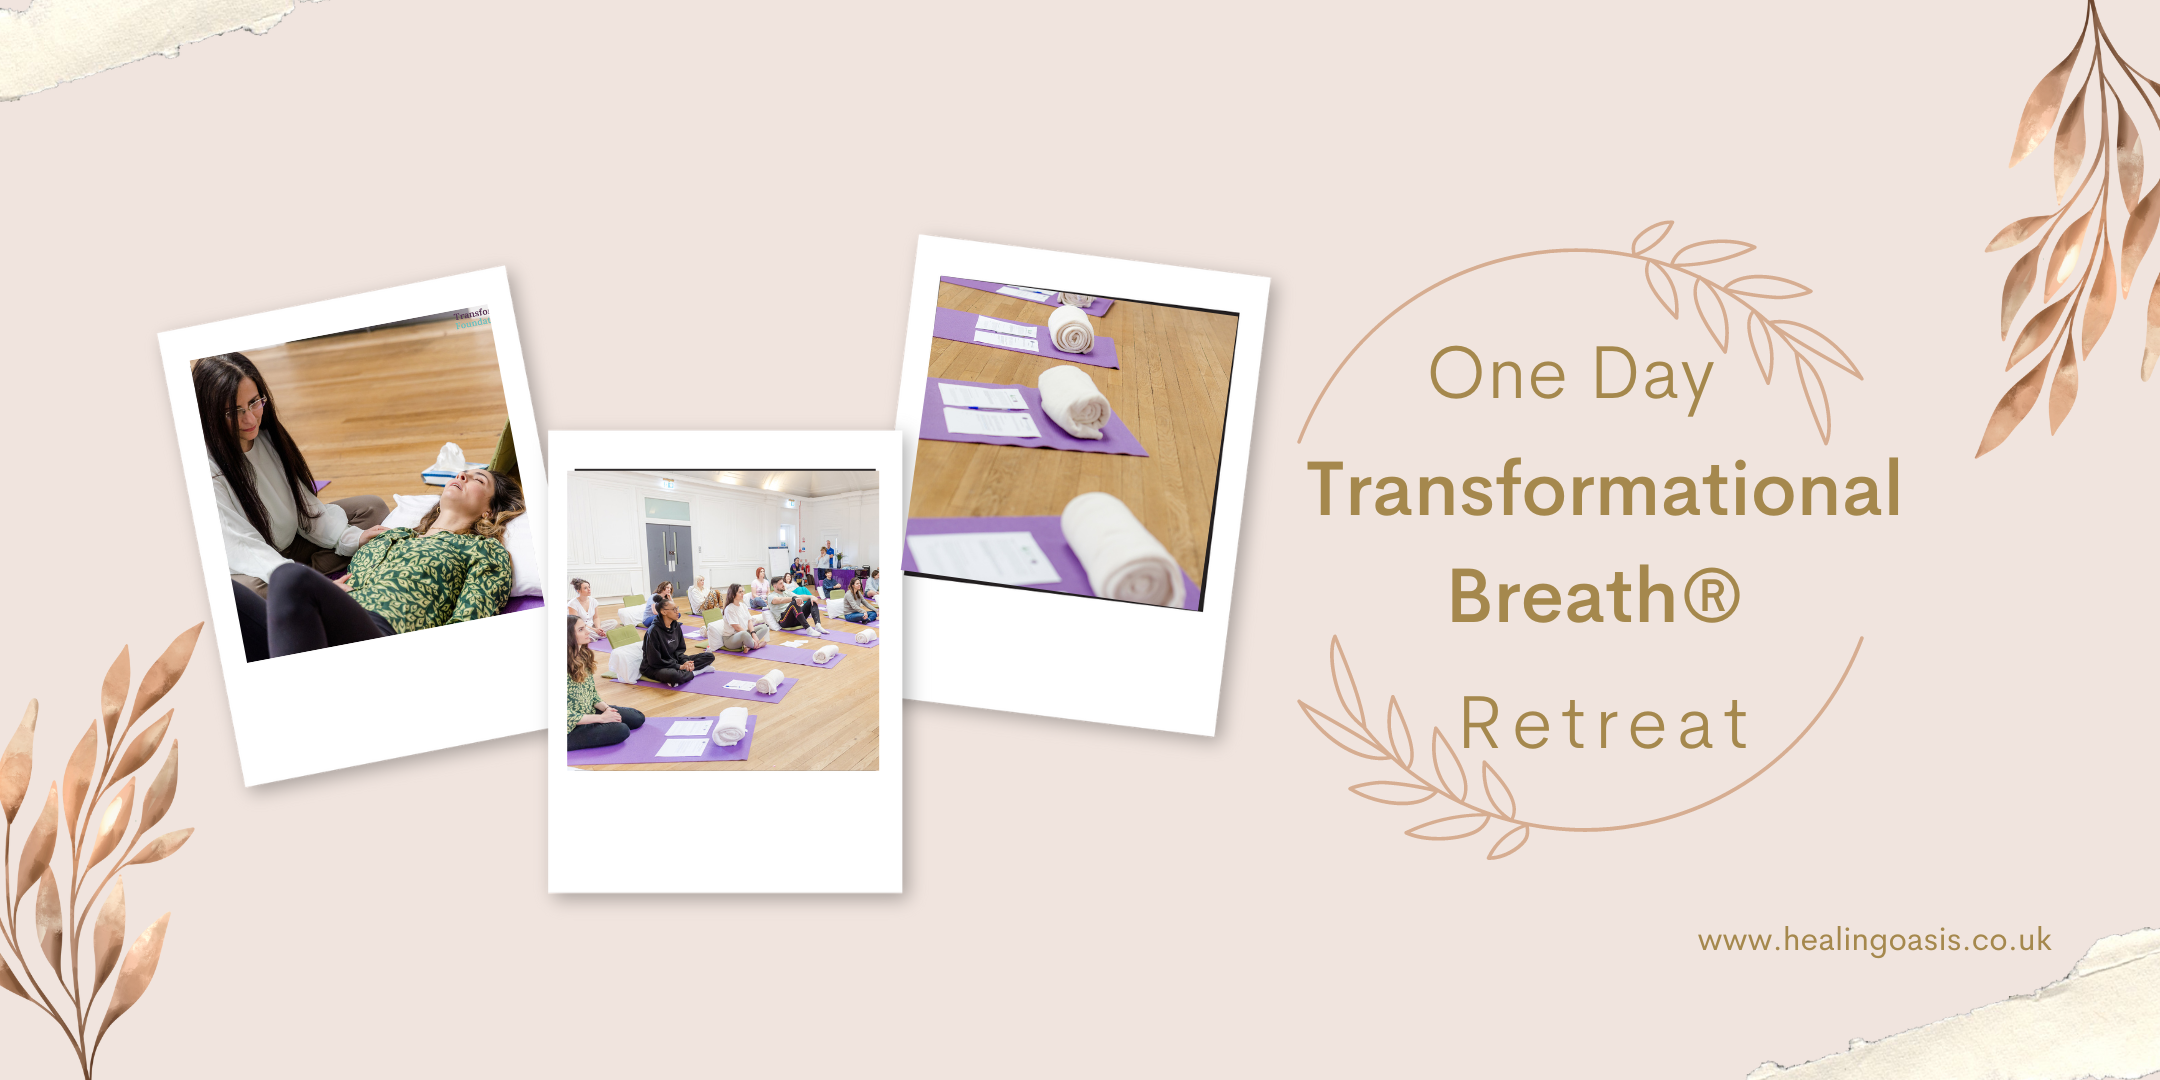 One Day Transformational Breath® Retreat To Experience the Magic Of Your Breath